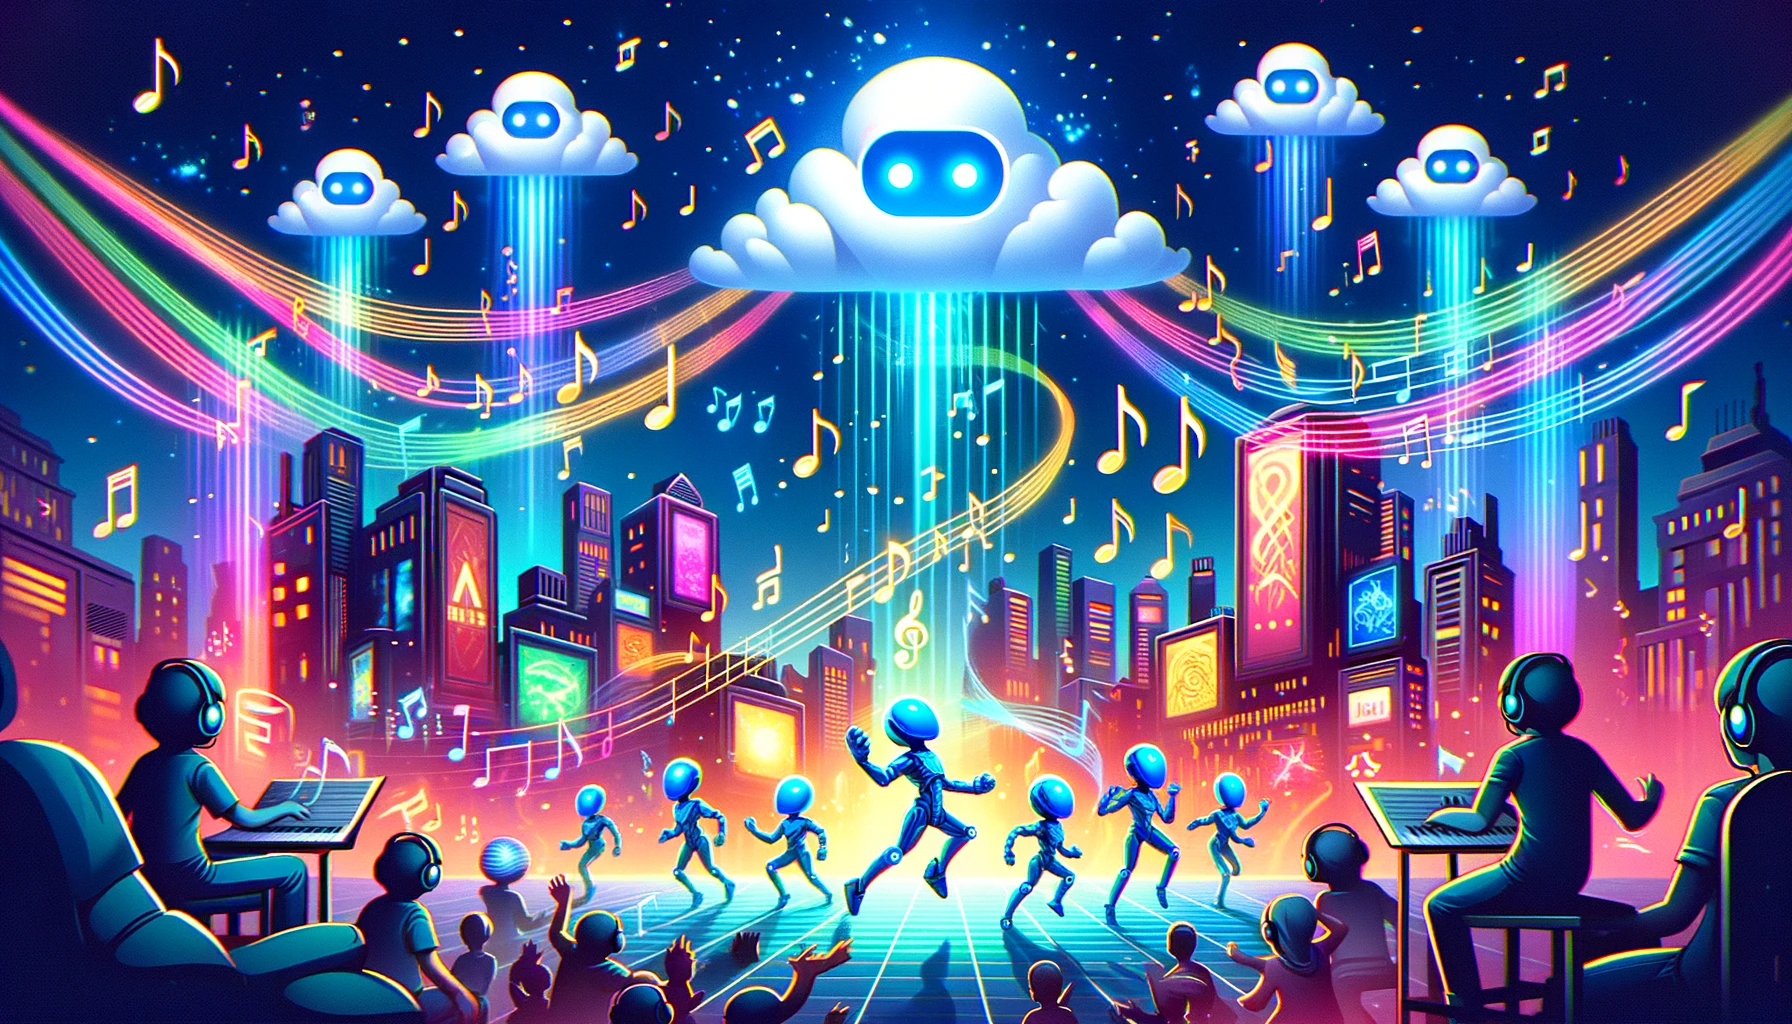 Illustration of a vibrant gaming world with characters dancing to music notes. In the background, a silhouette of a city with glowing buildings, each